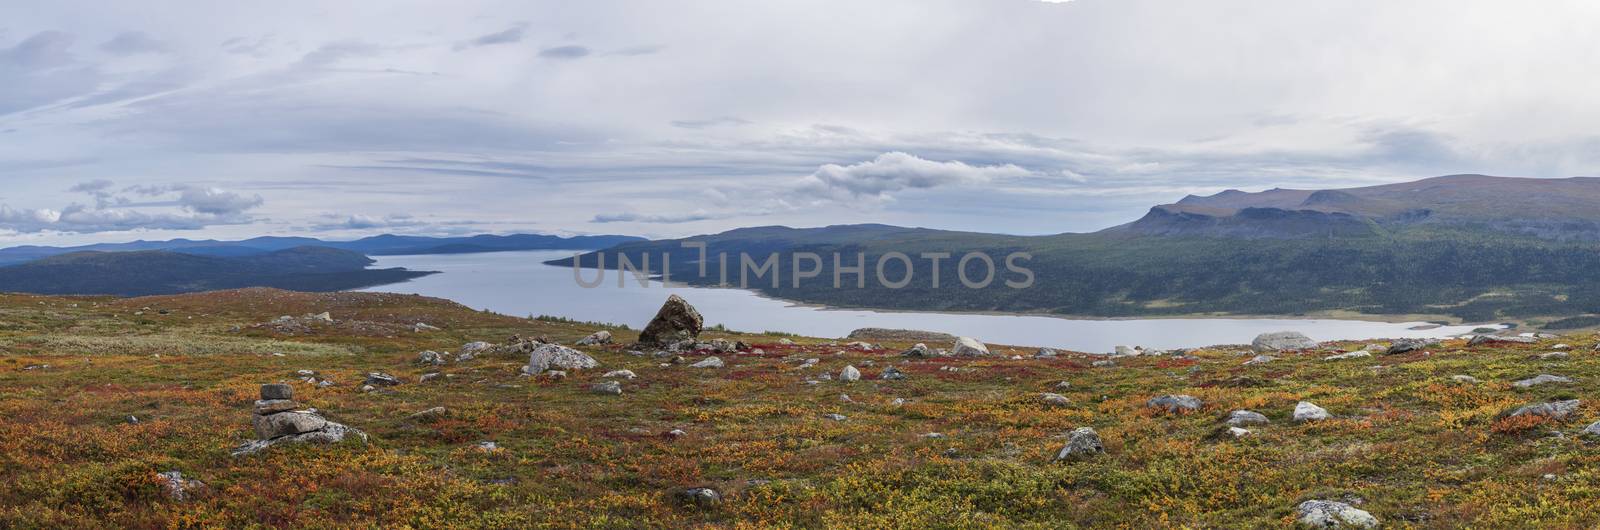 Panoramic landscape of wild nature in Sarek national park in Sweden Lapland with snow capped mountain peaks, river and lake, birch and spruce tree forest. Early autumn colors, blue sky white clouds